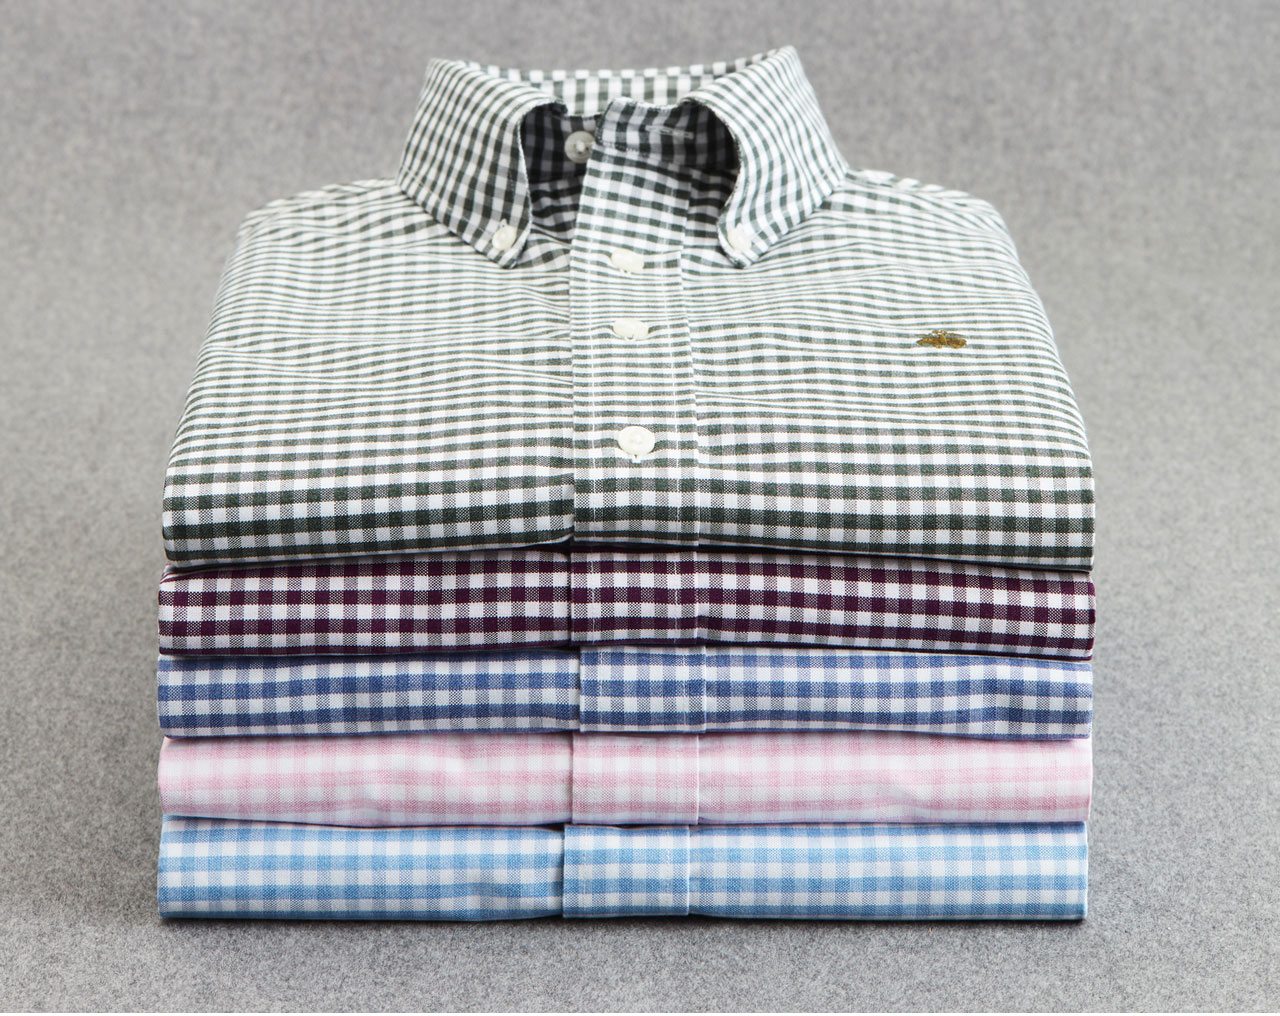 Tried and True Gingham Shirts never go out of style, so pick up a few in these fall-approved colors.